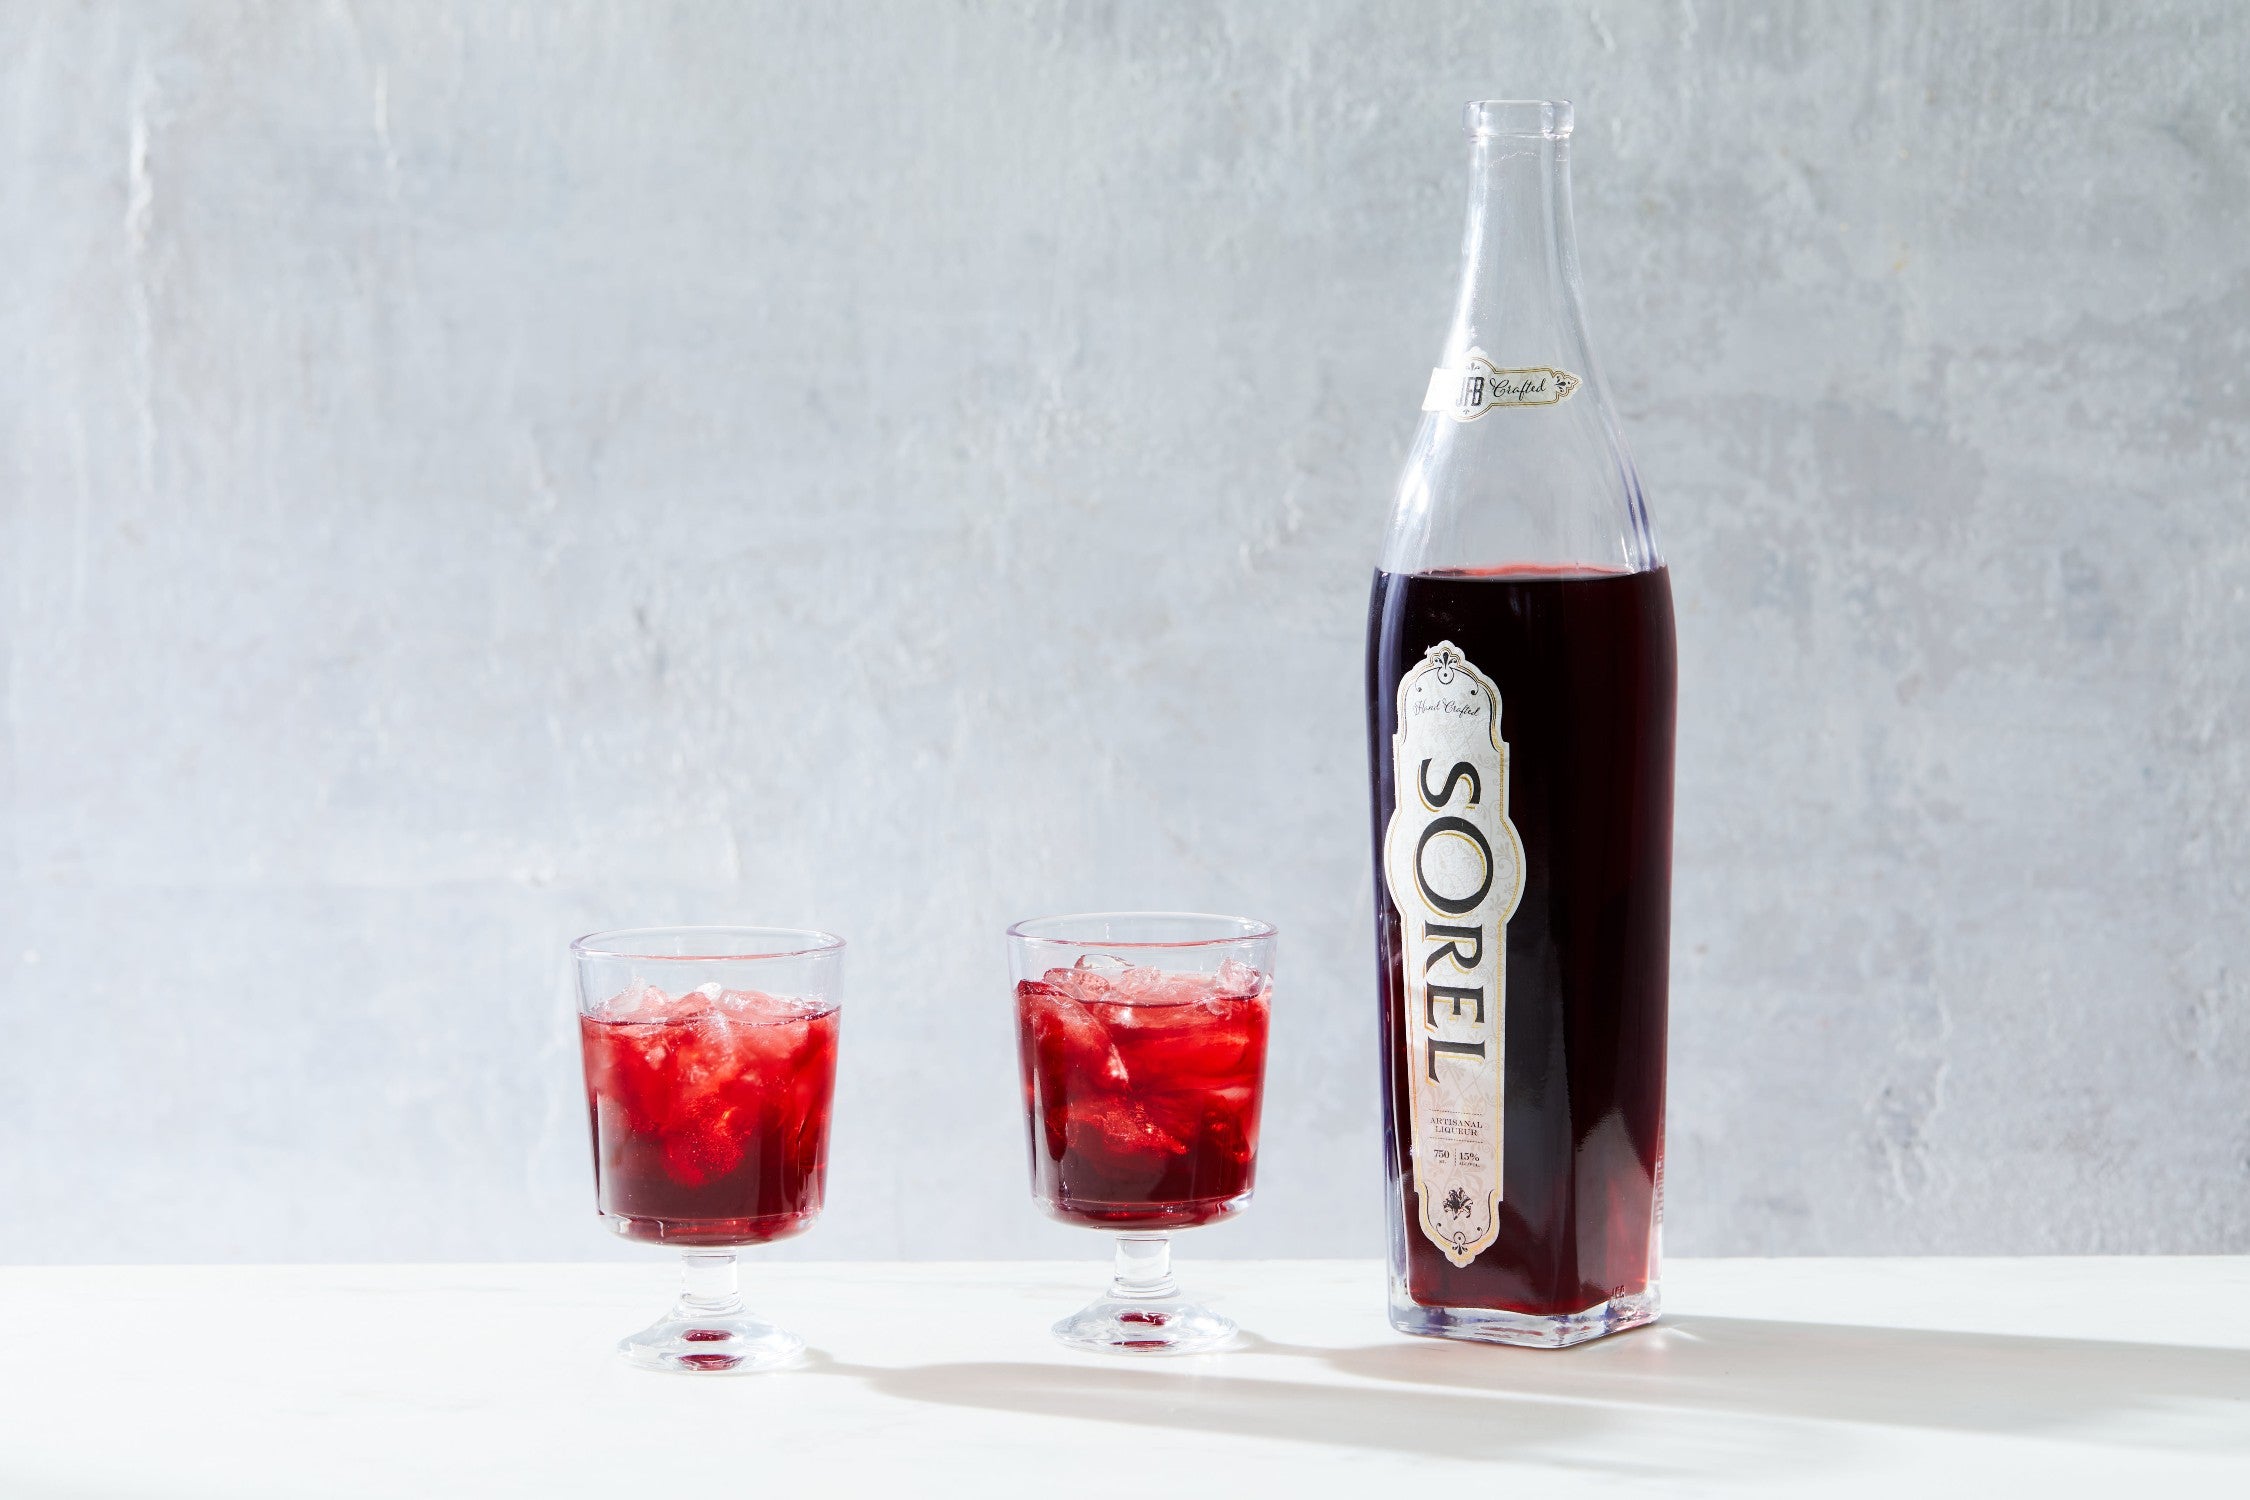 From Jamaica to Senegal, This Crimson Infusion Reigns Supreme